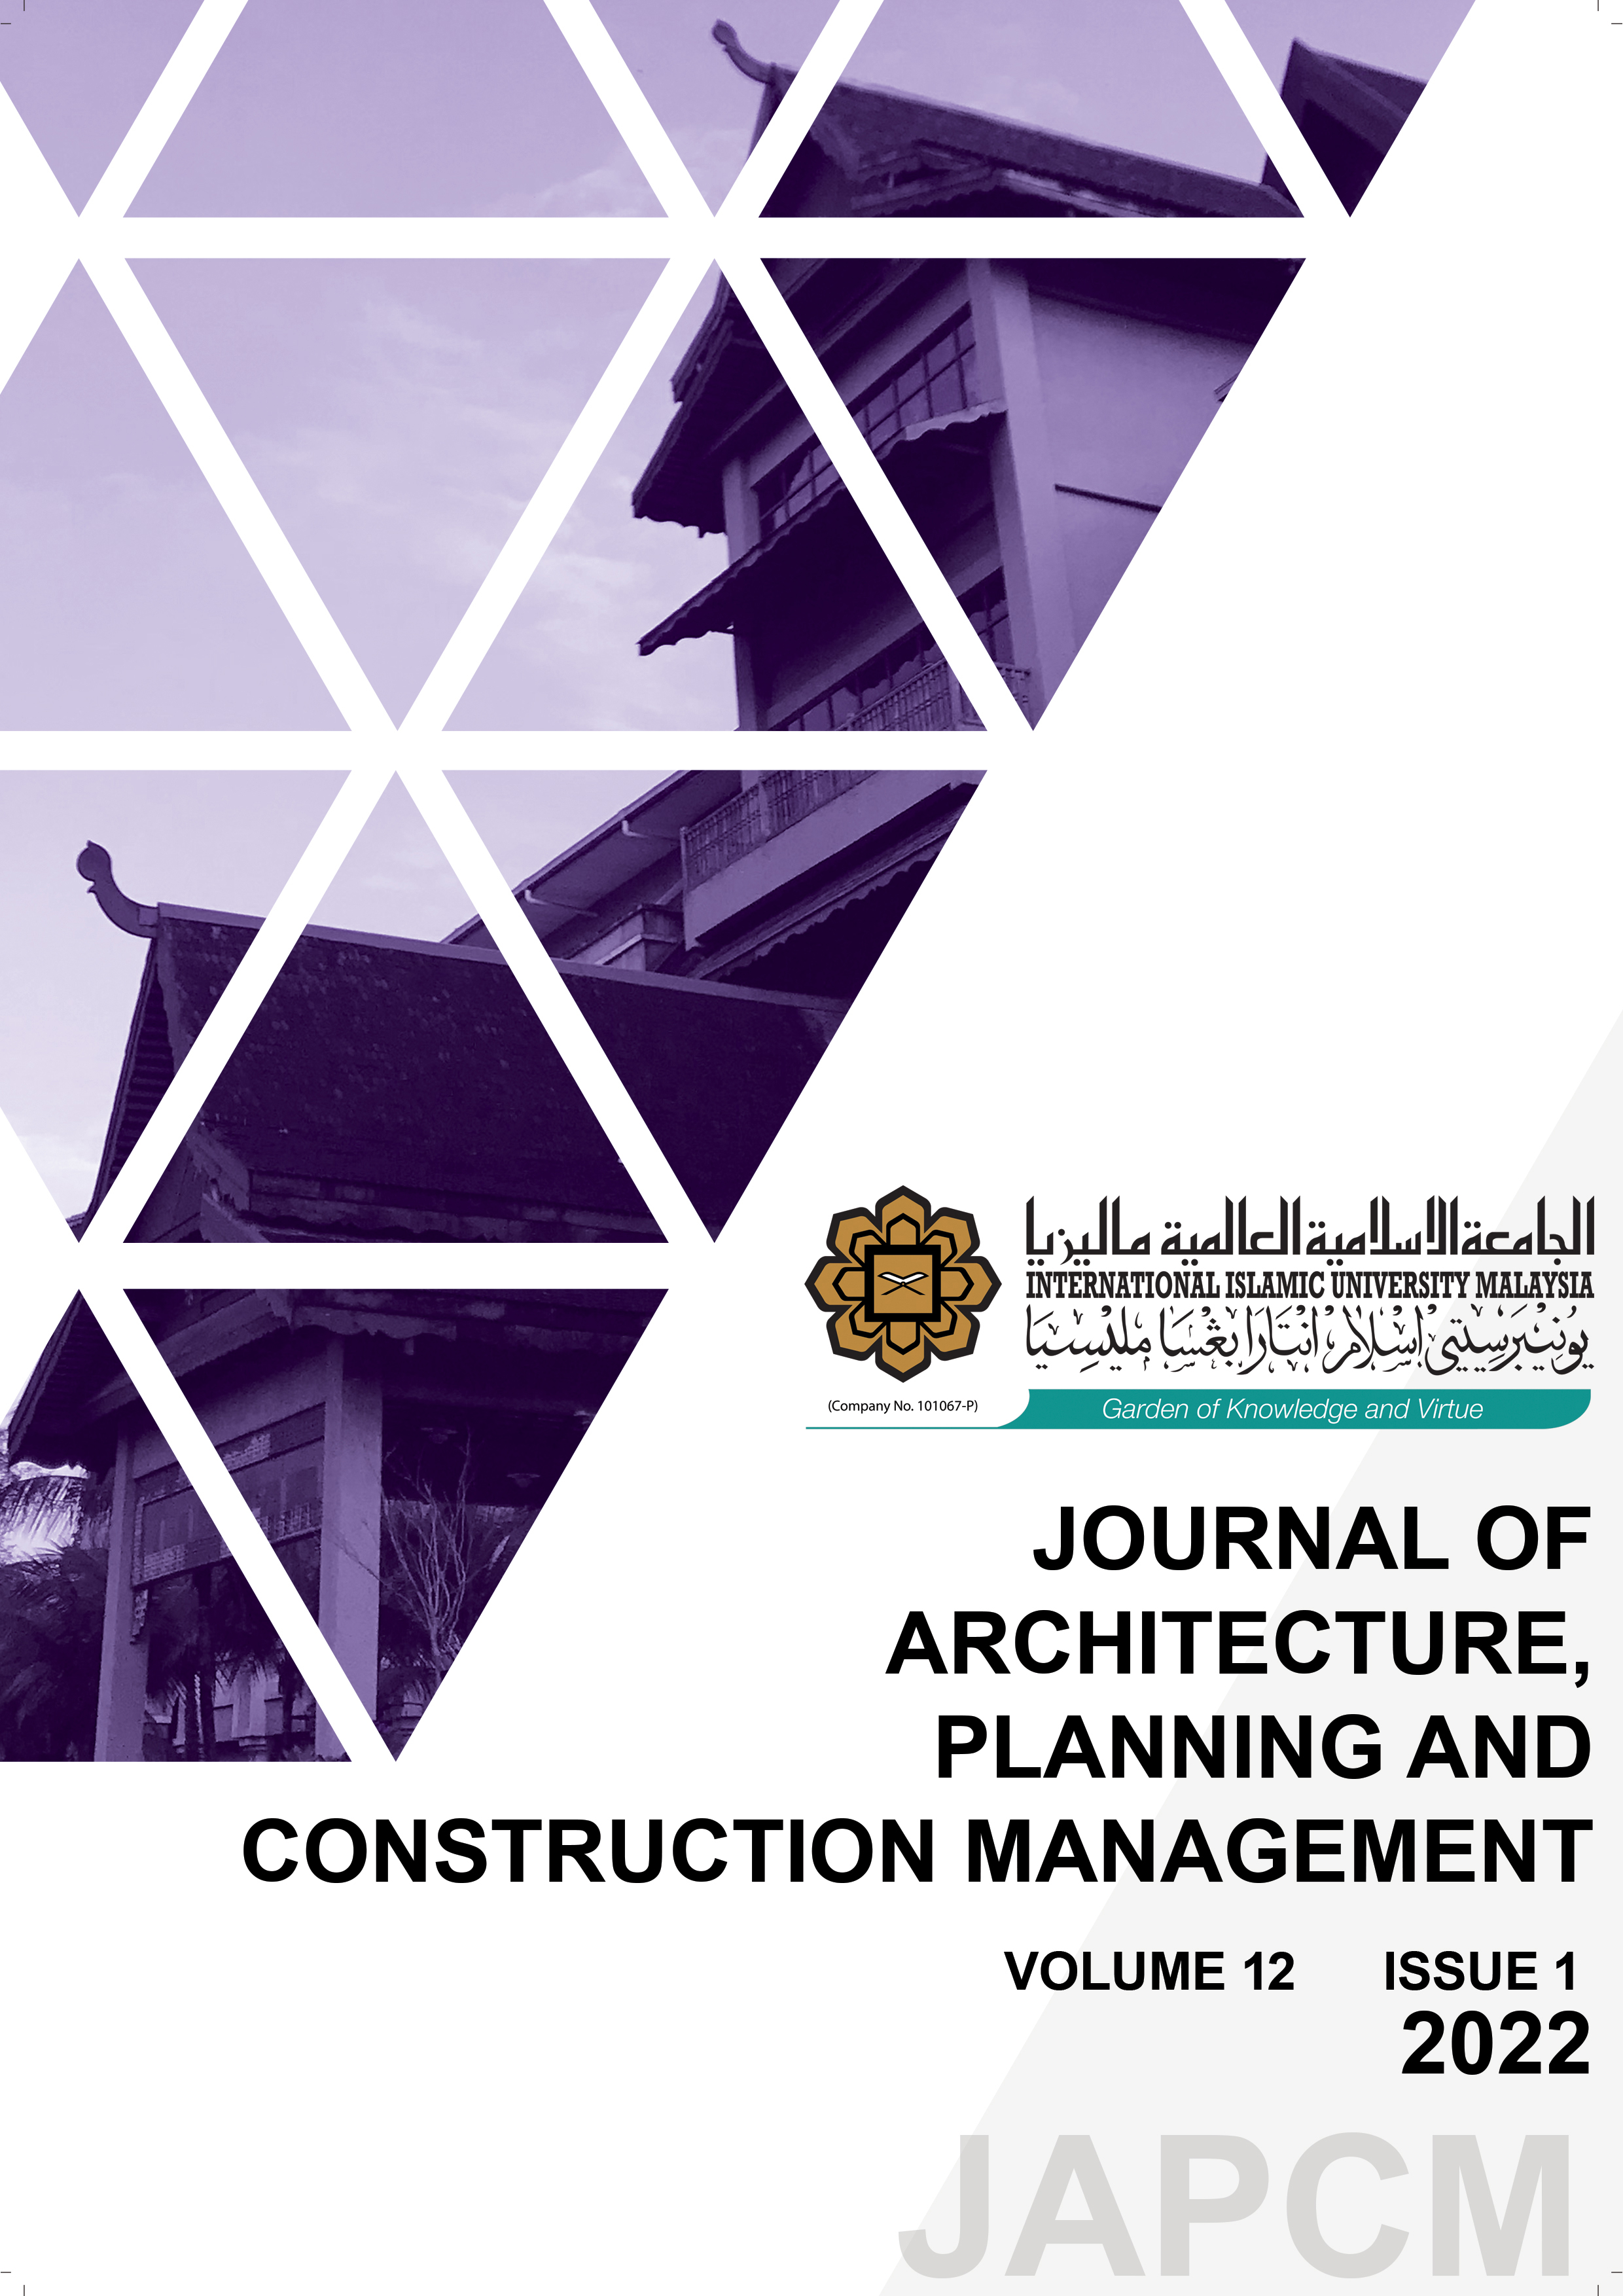 					View Vol. 12 No. 1 (2022): Journal of Architecture, Planning and Construction Management (JAPCM)
				